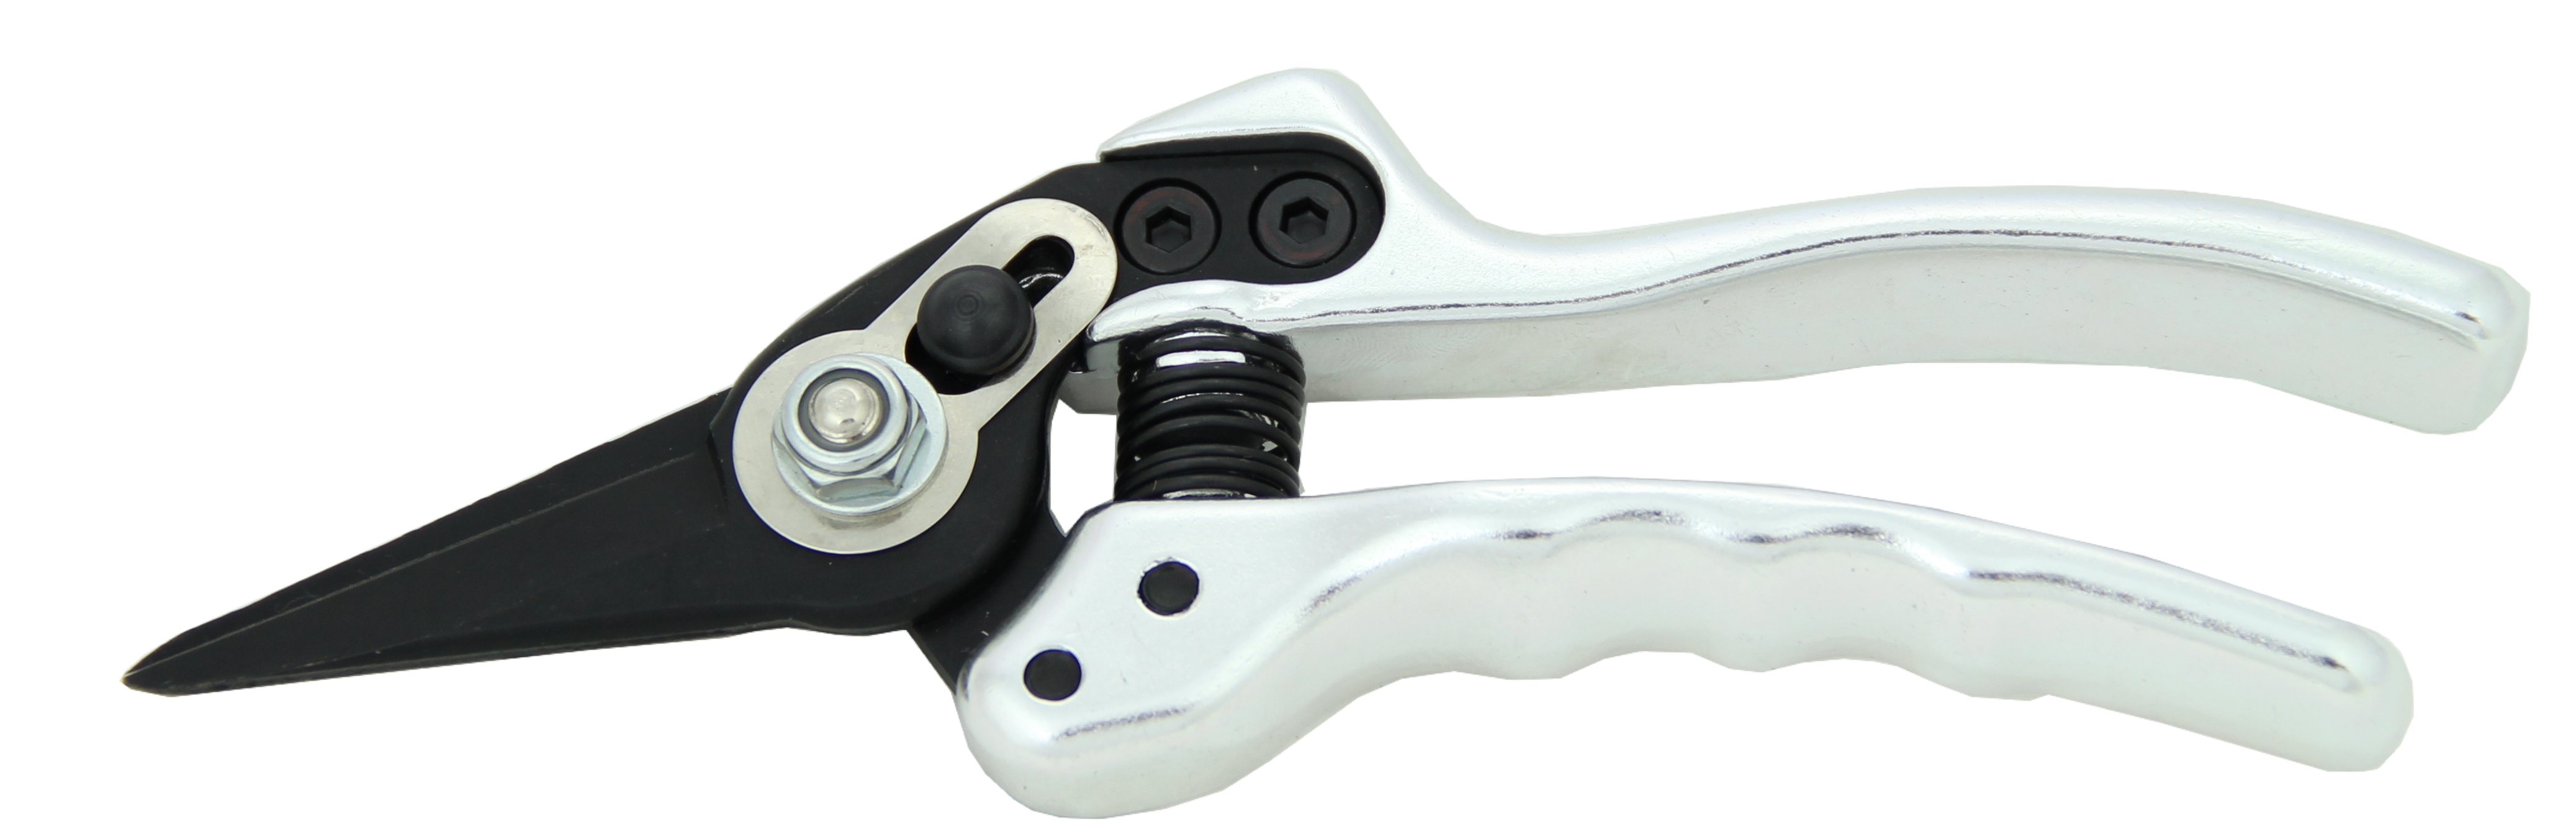 6.75” Trimmer, Drop Forged Handles (Pruners)